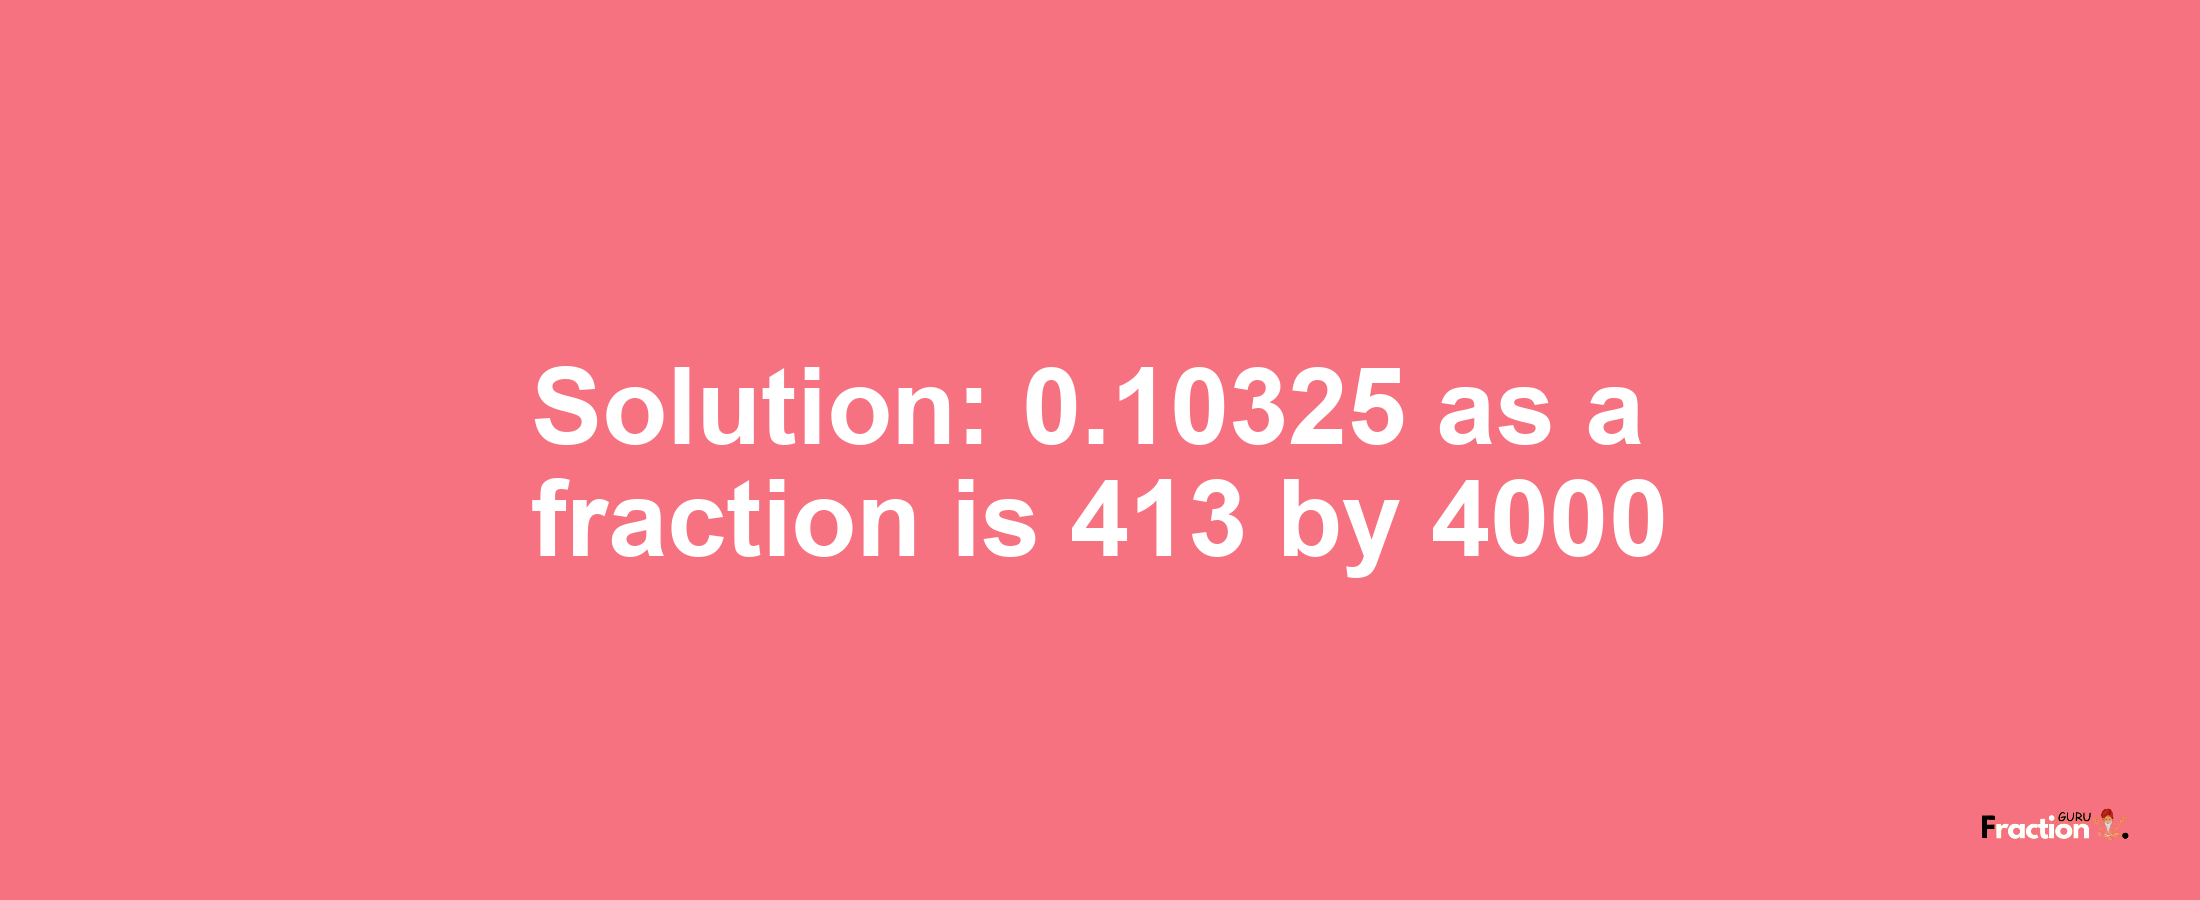 Solution:0.10325 as a fraction is 413/4000